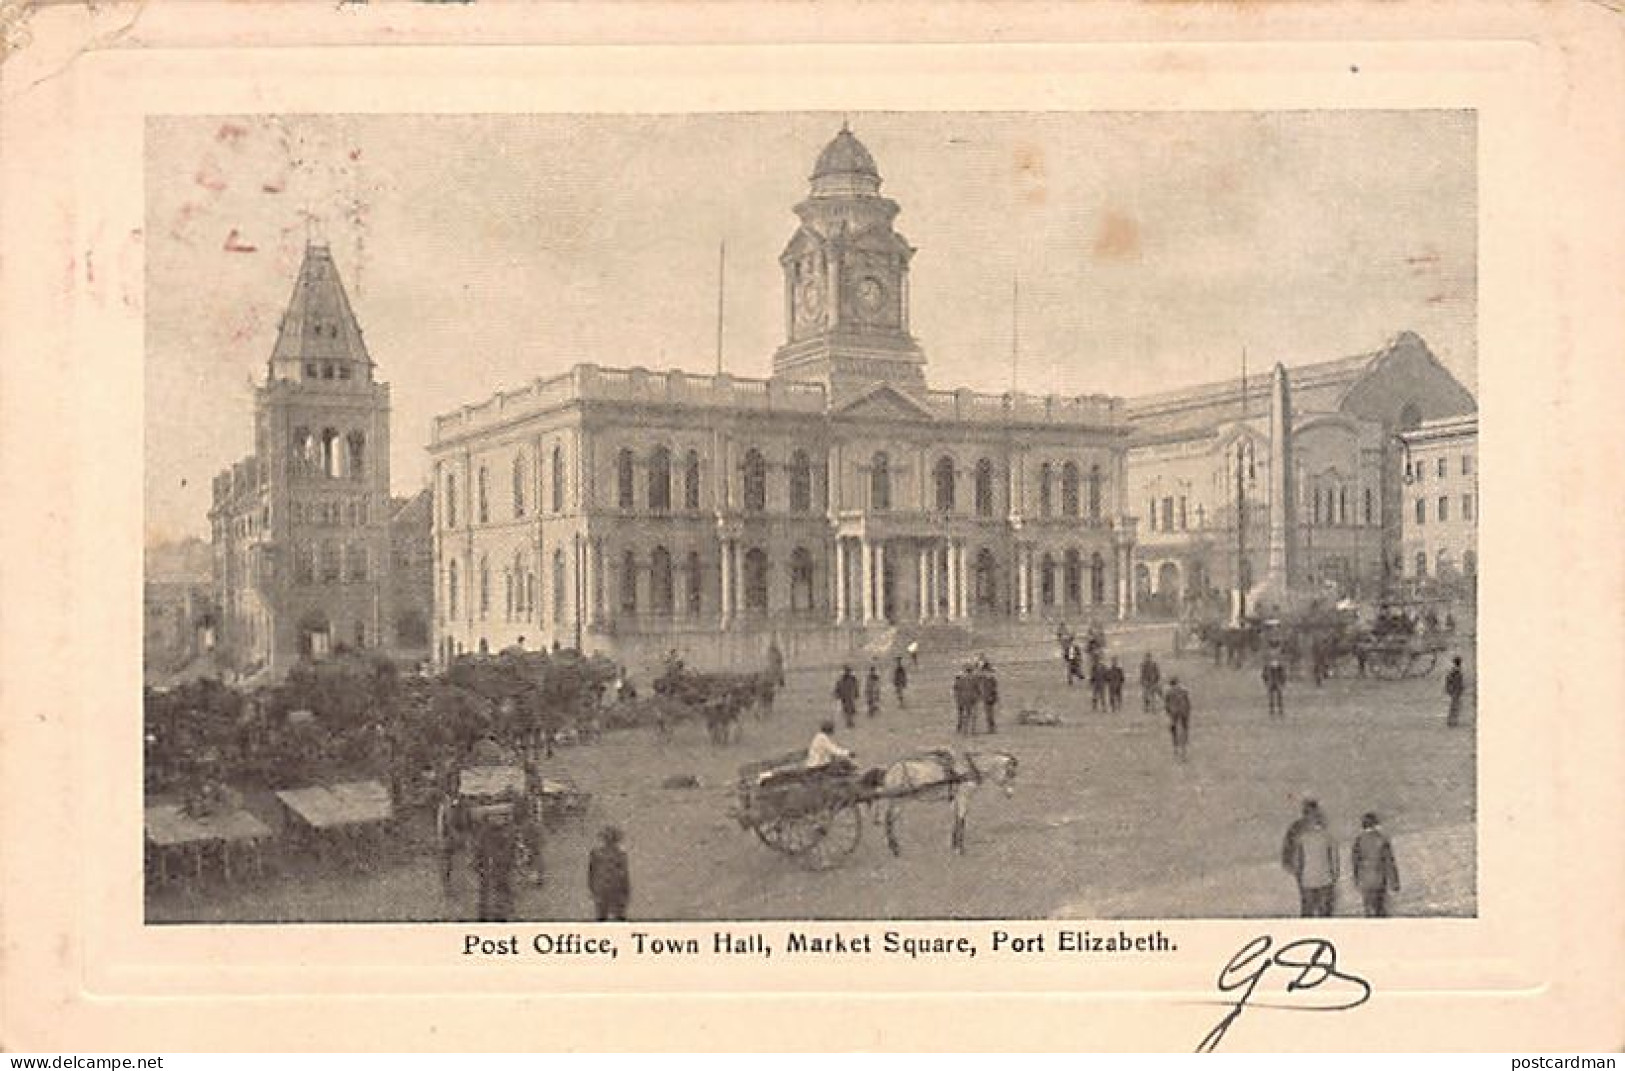 South Africa - PORT ELIZABETH - Post Office, Town Hall, Market Square - Publ. G. B. & Co.  - South Africa